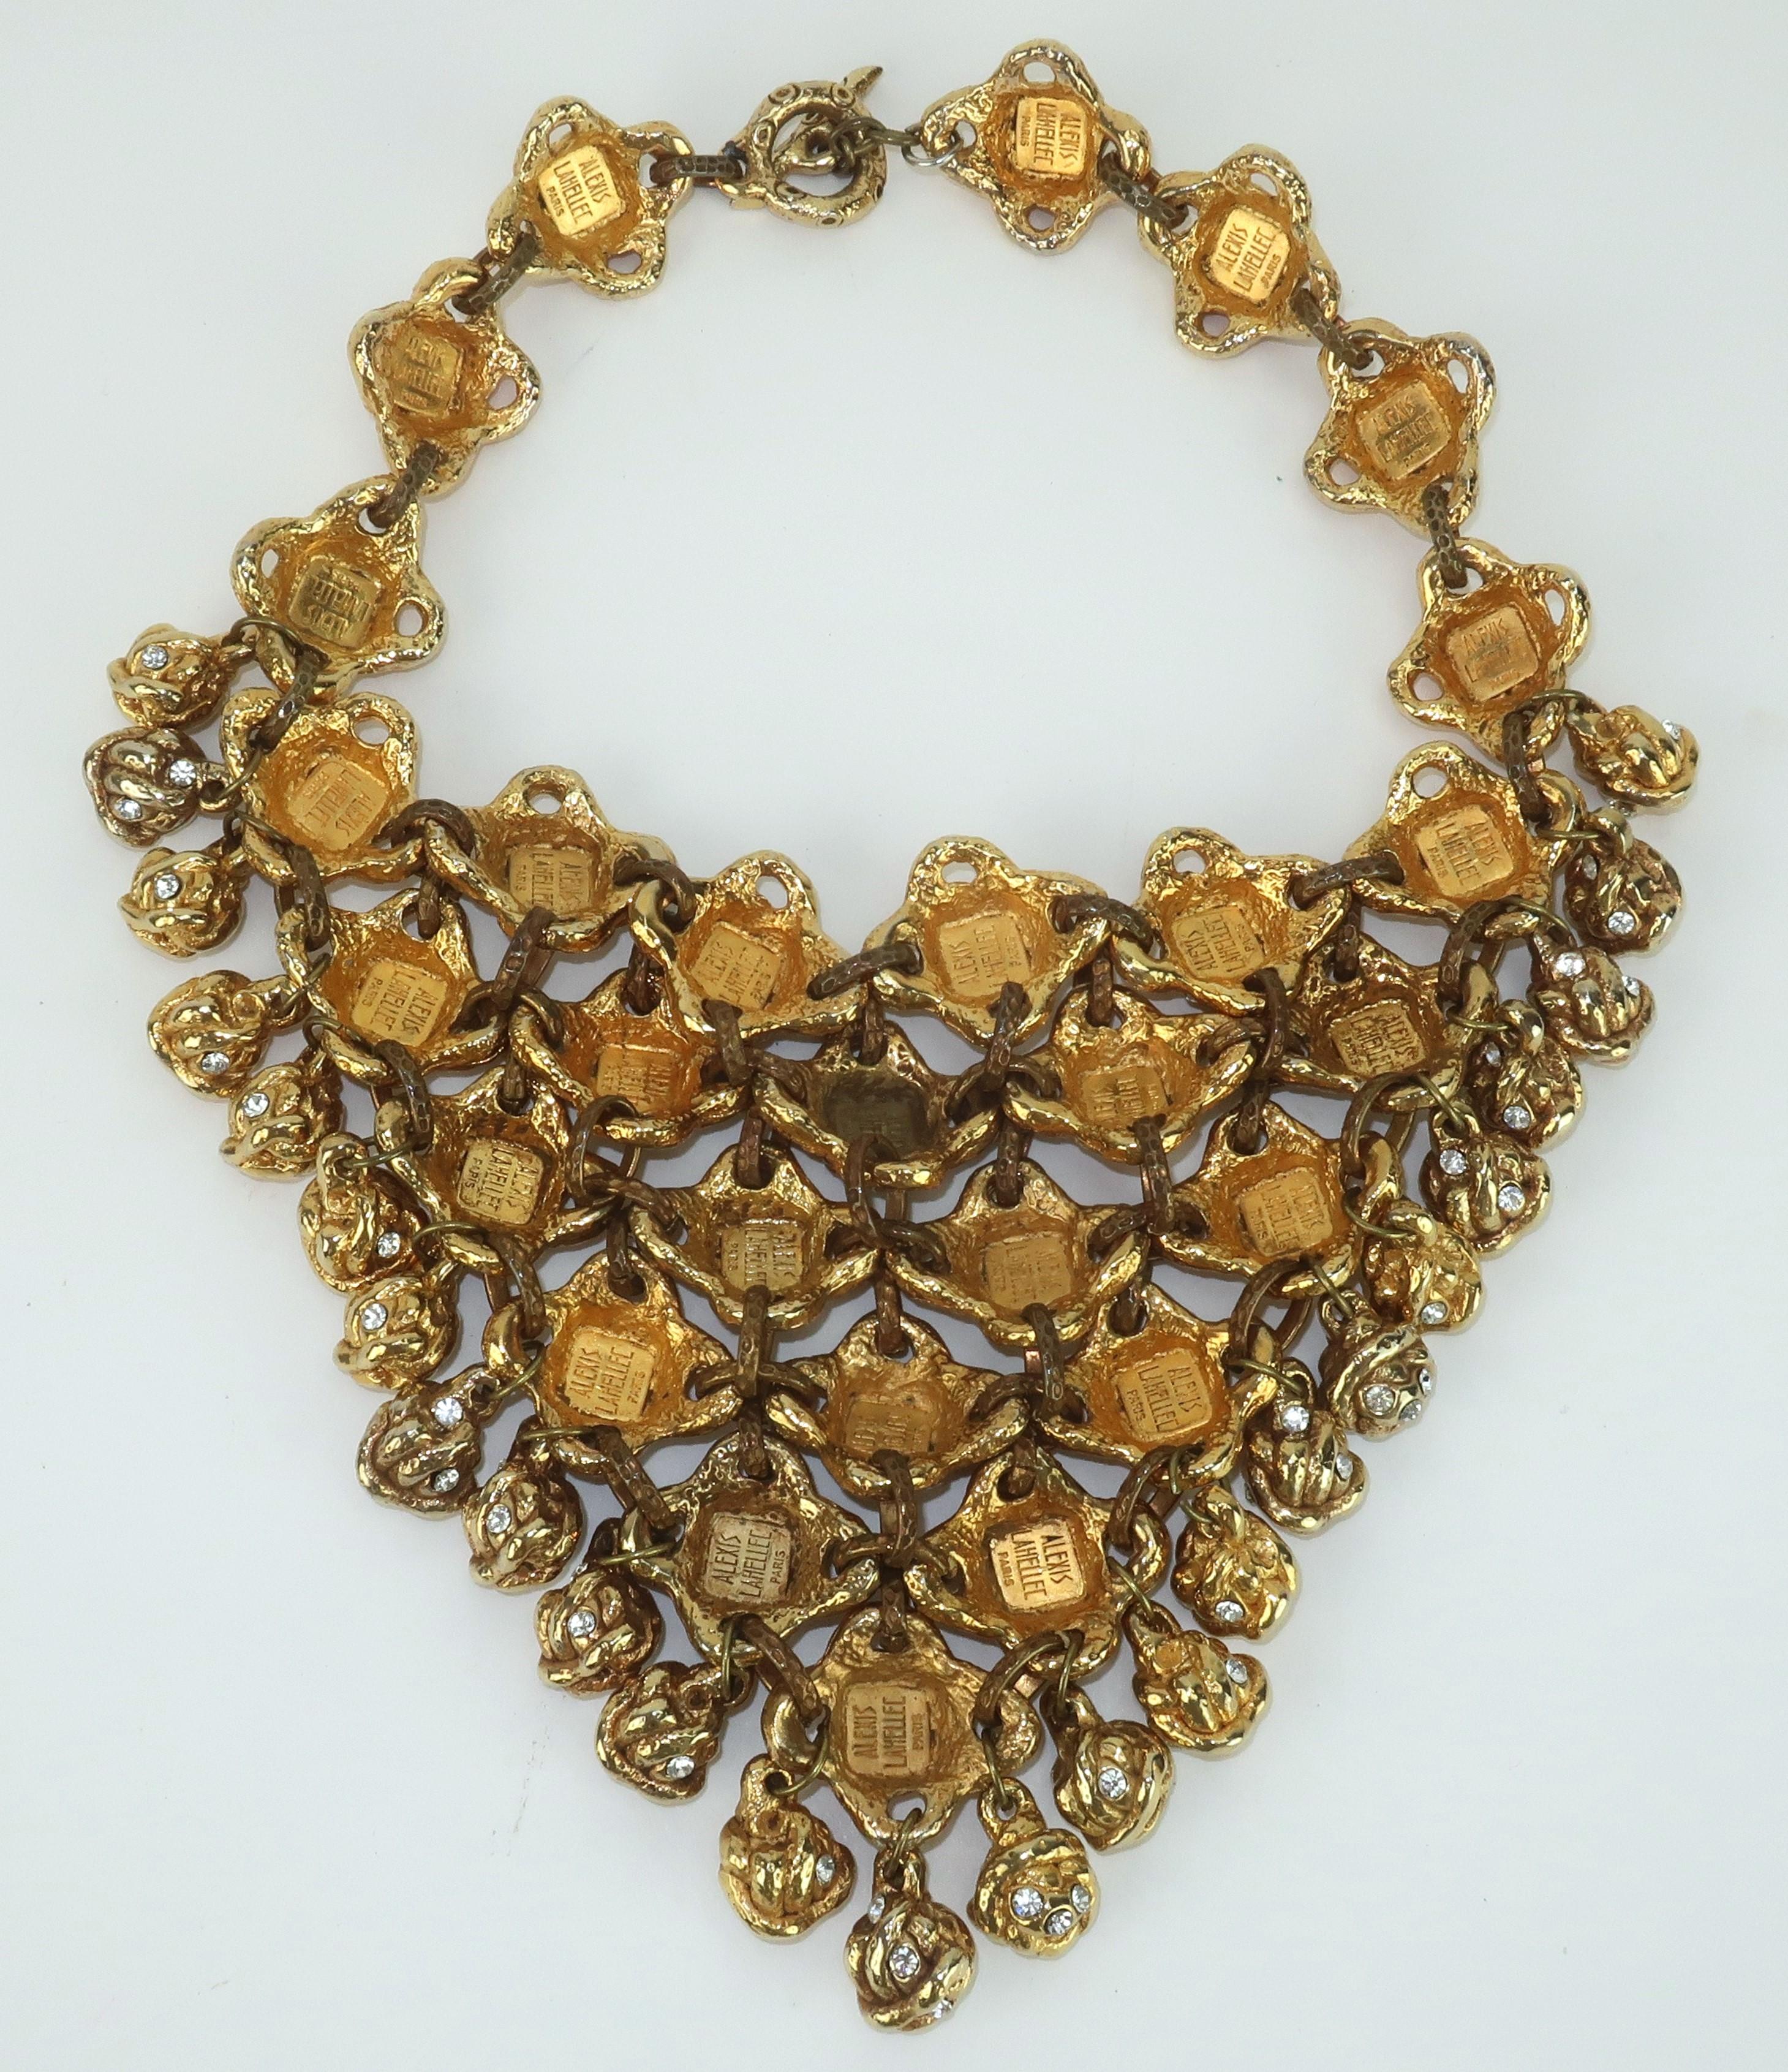 ALEXIS LAHELLEC Brutalist Gold Tone & Rhinestone French Bib Necklace, 1980’s For Sale 4